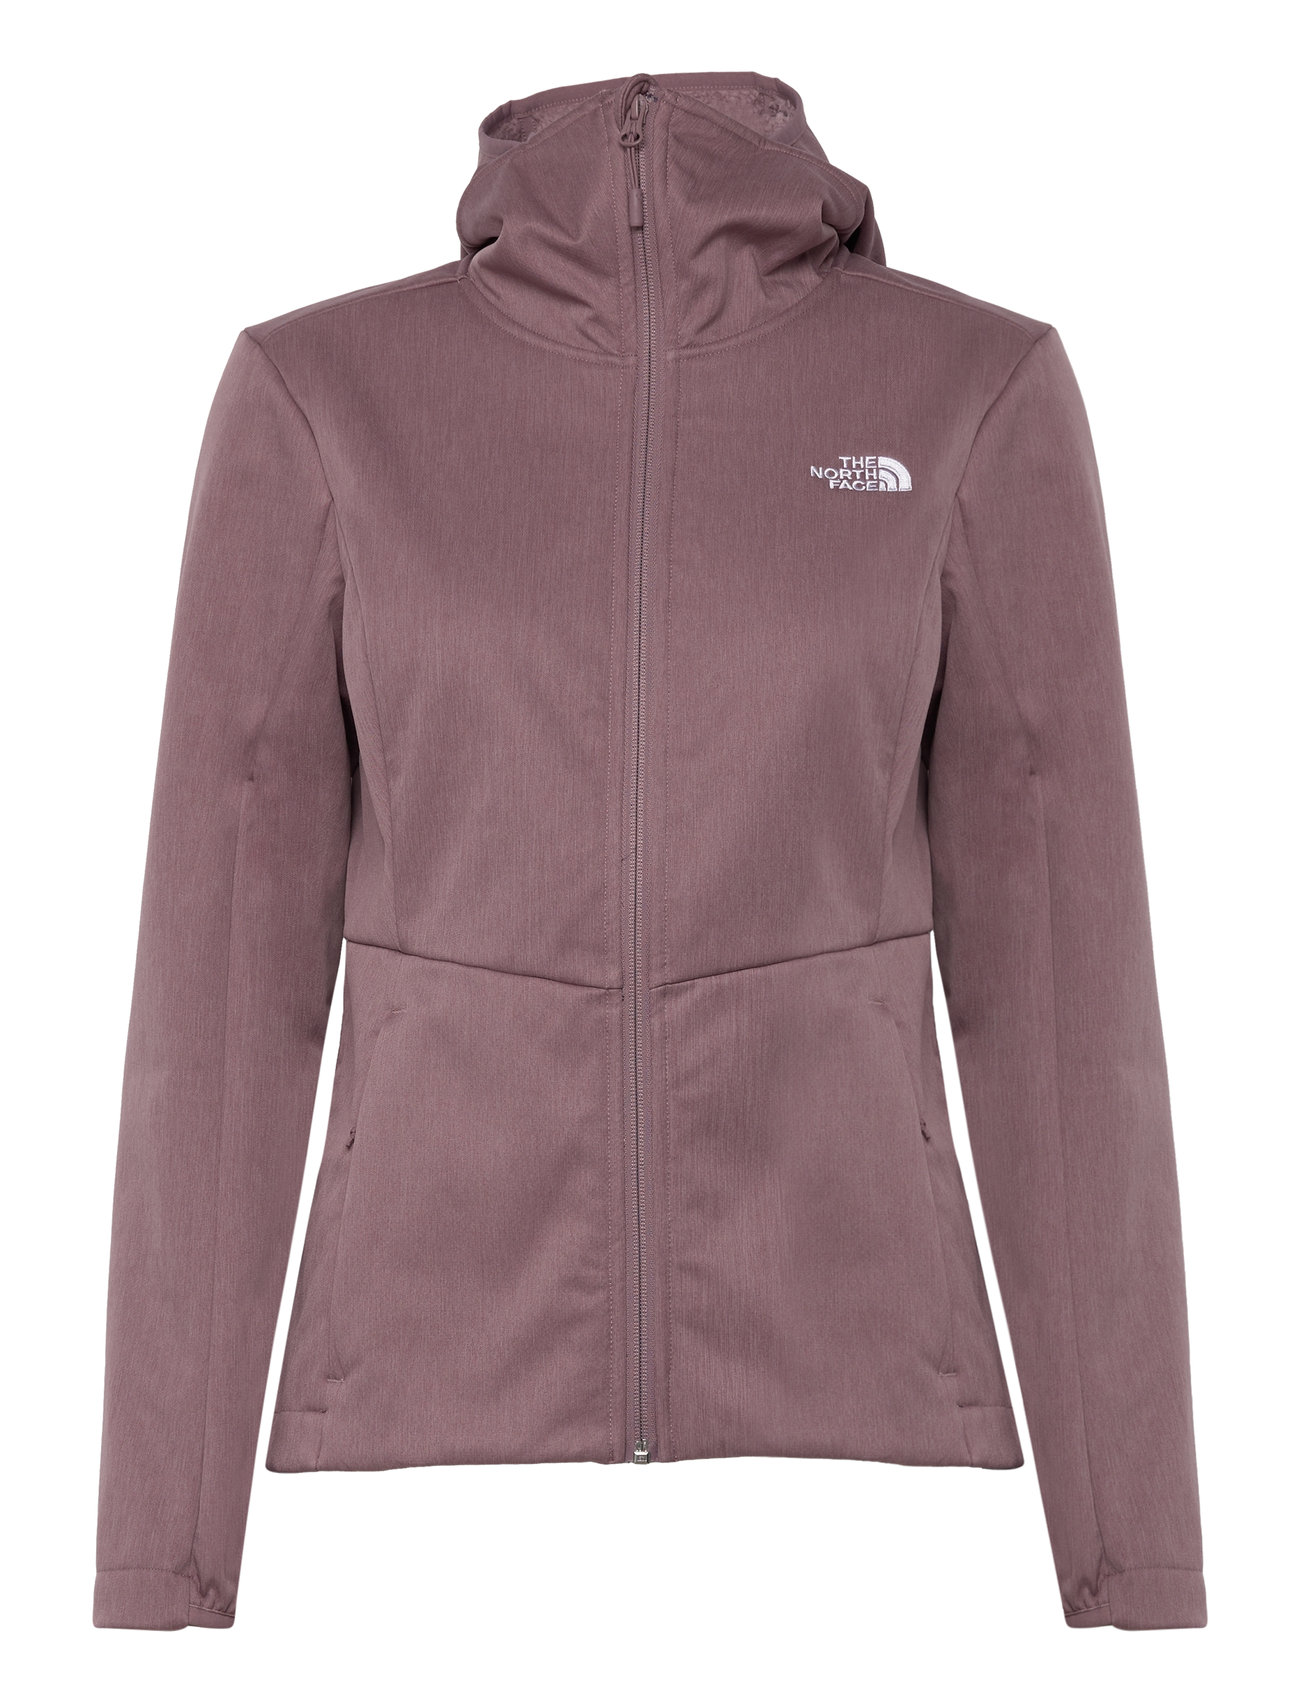 "The North Face" "W Quest Highloft Soft Shell Jacket - Eu Sport Jackets Windbreakers Purple The